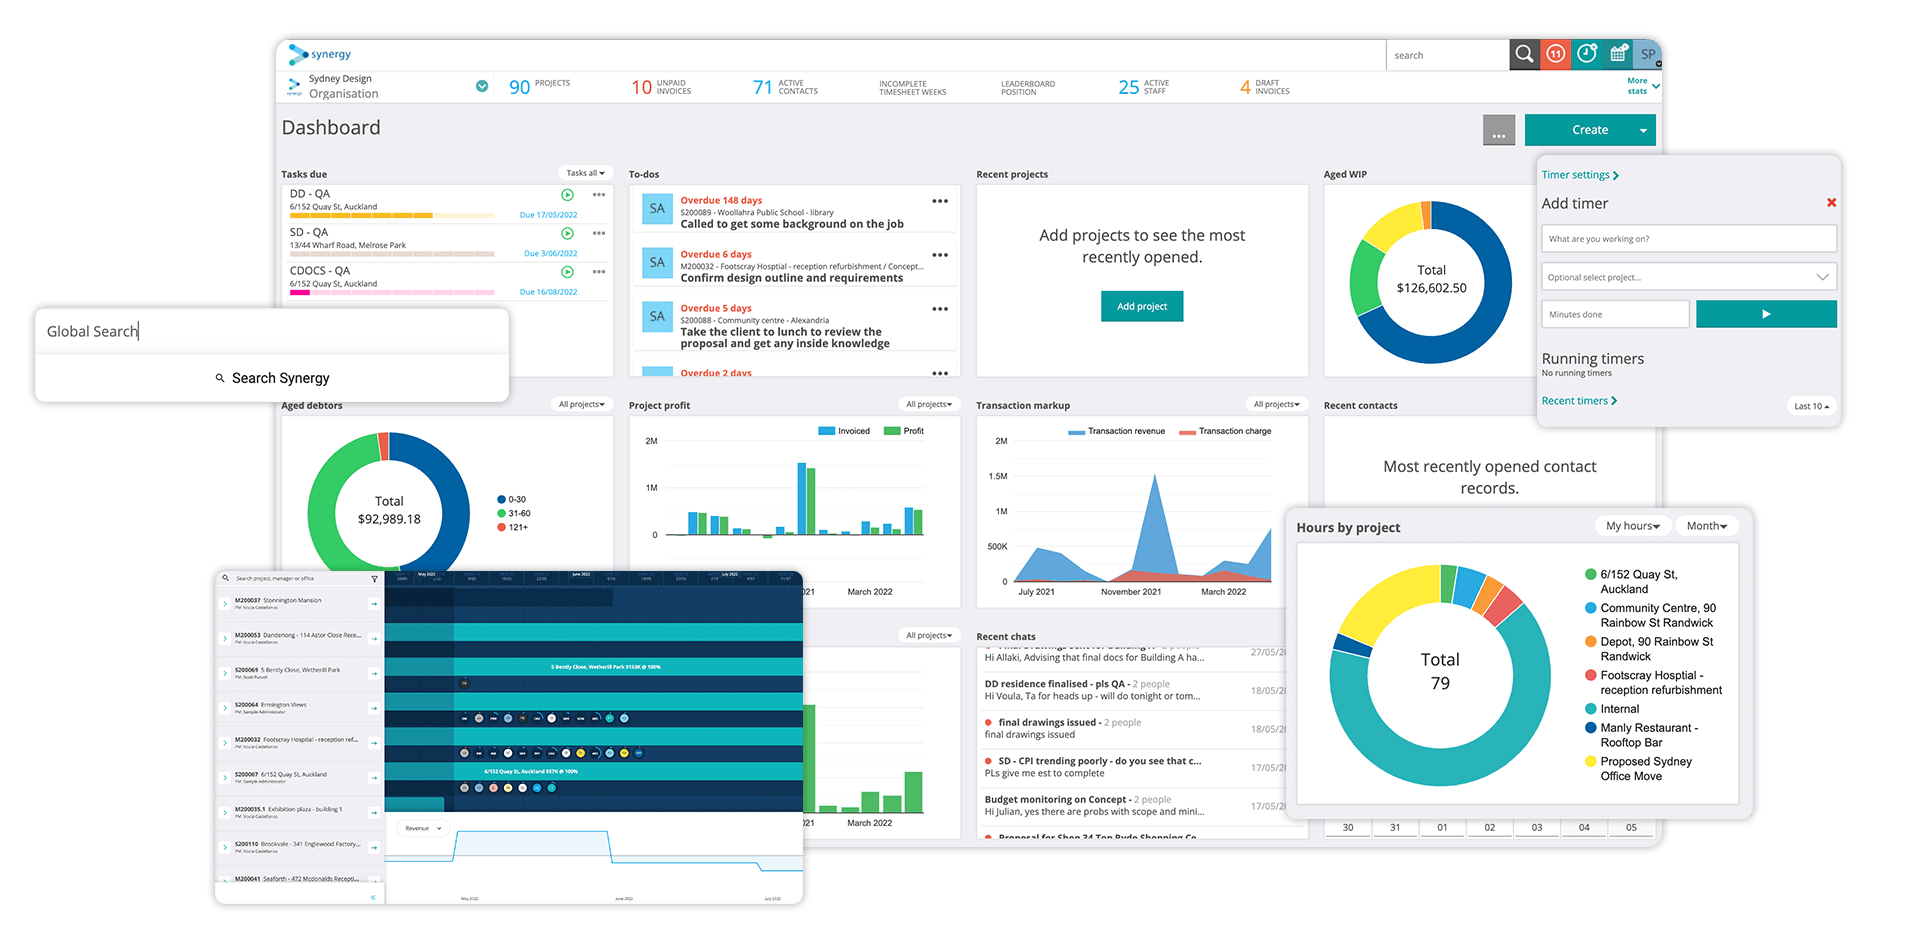 Dashboards give you a comprehensive snapshot of reality.